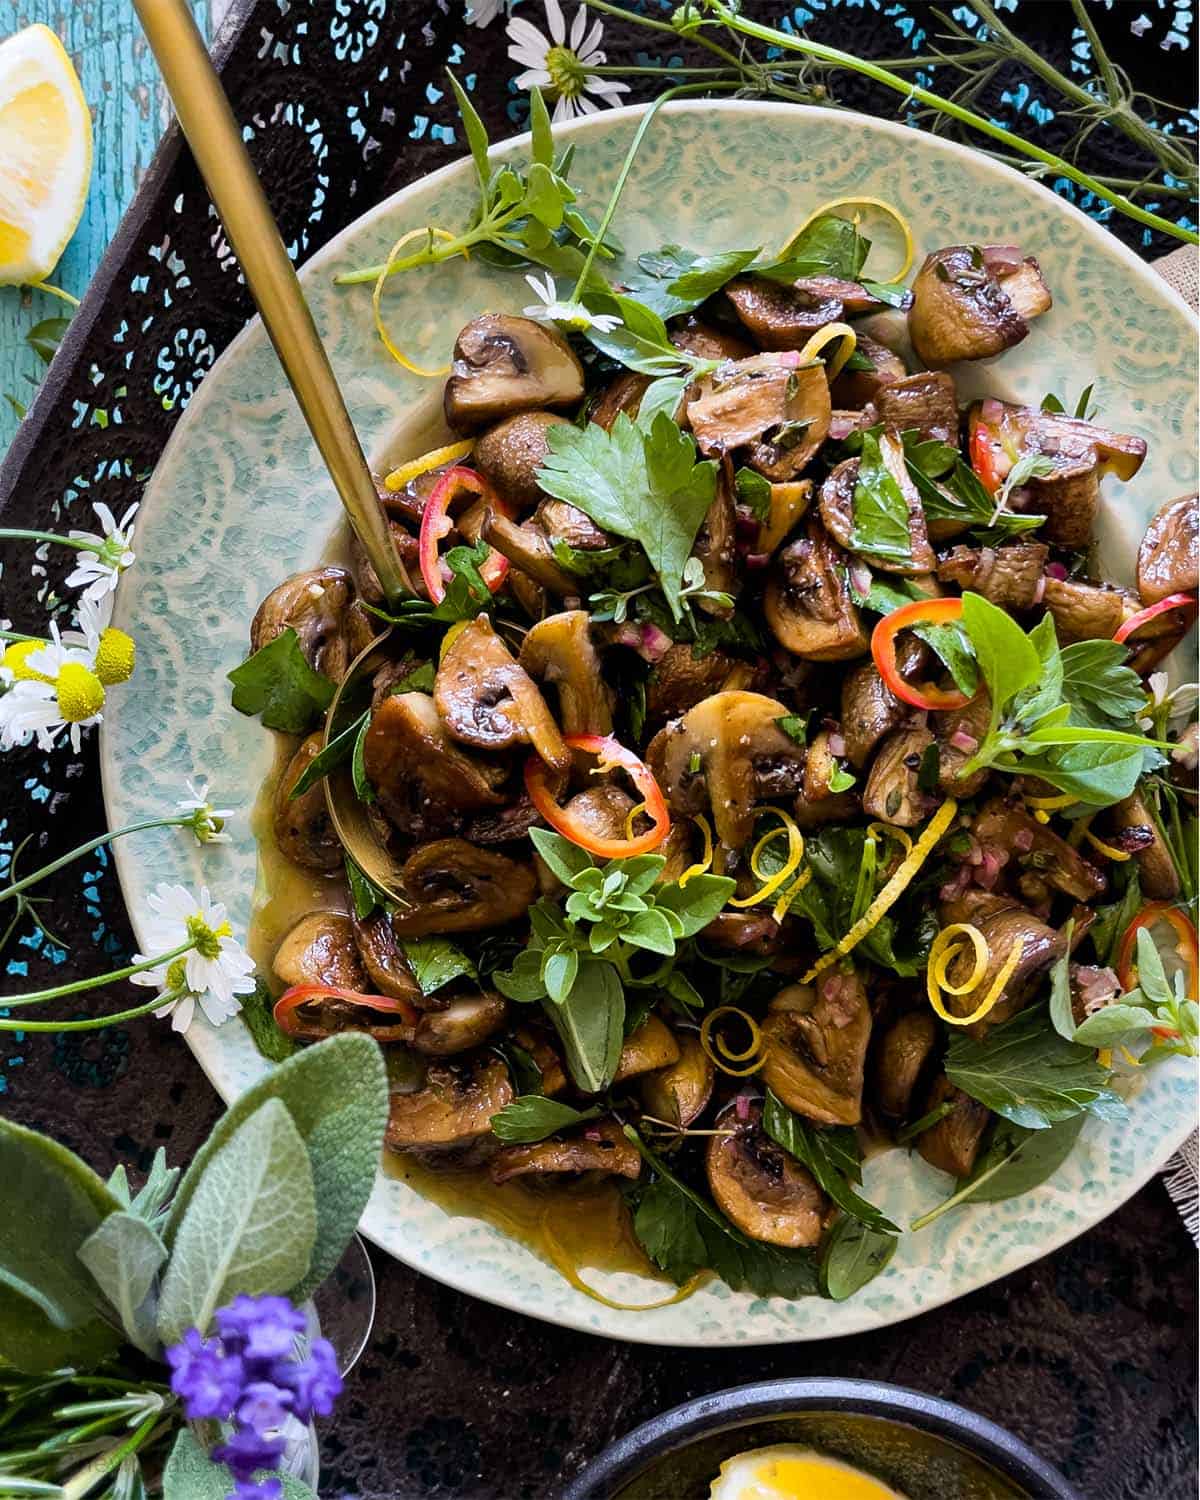 Mushroom salad served on a decorative blue plate and served with a gold spoon.